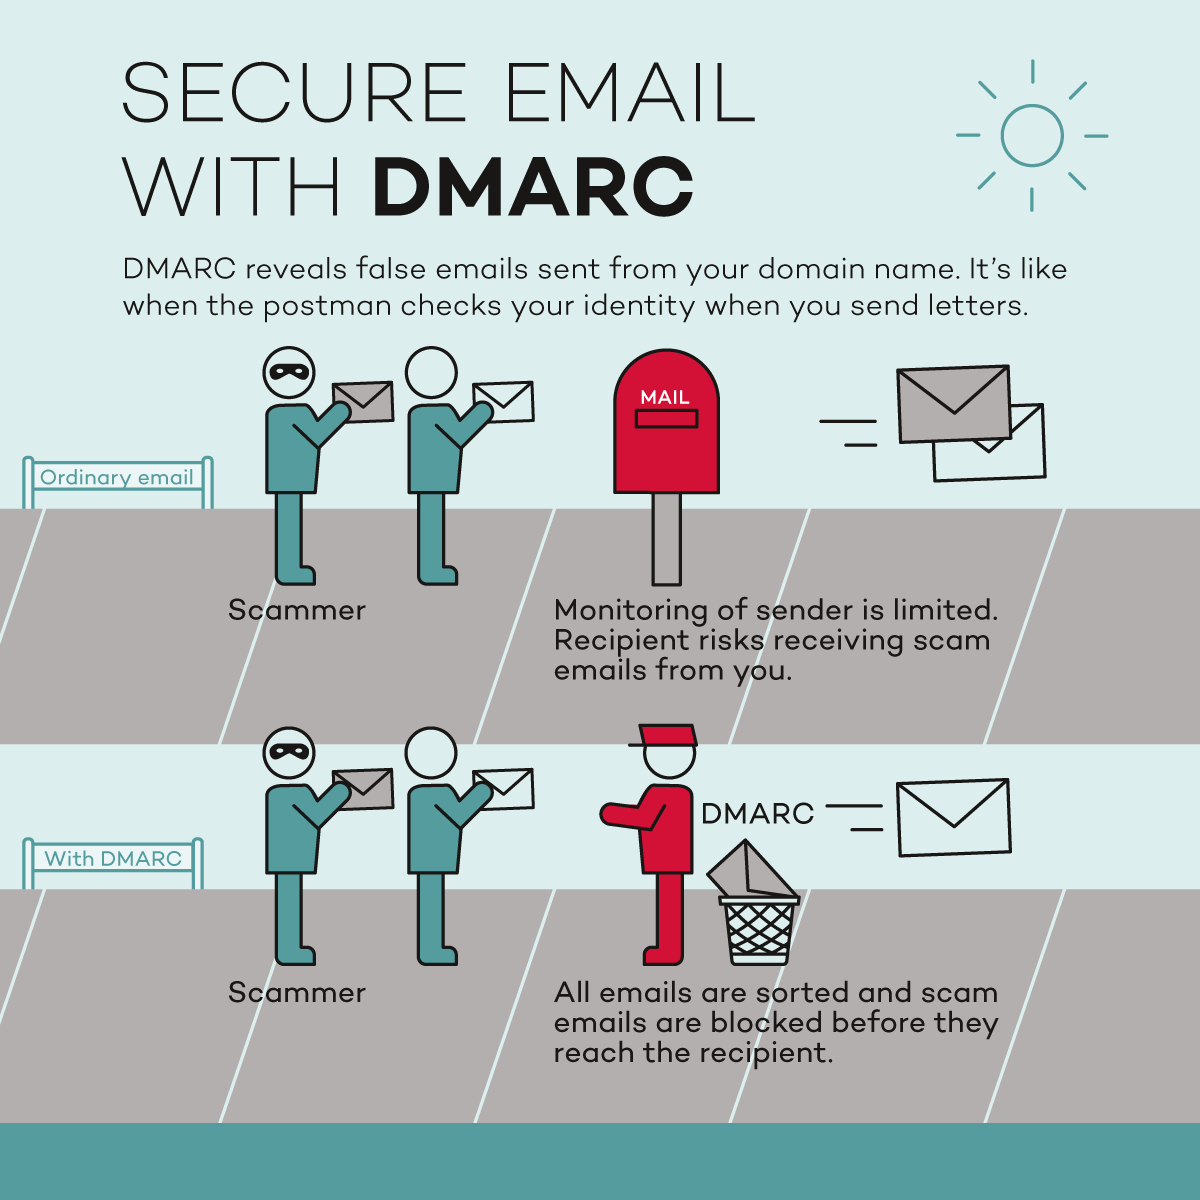 Secure email with DMARC